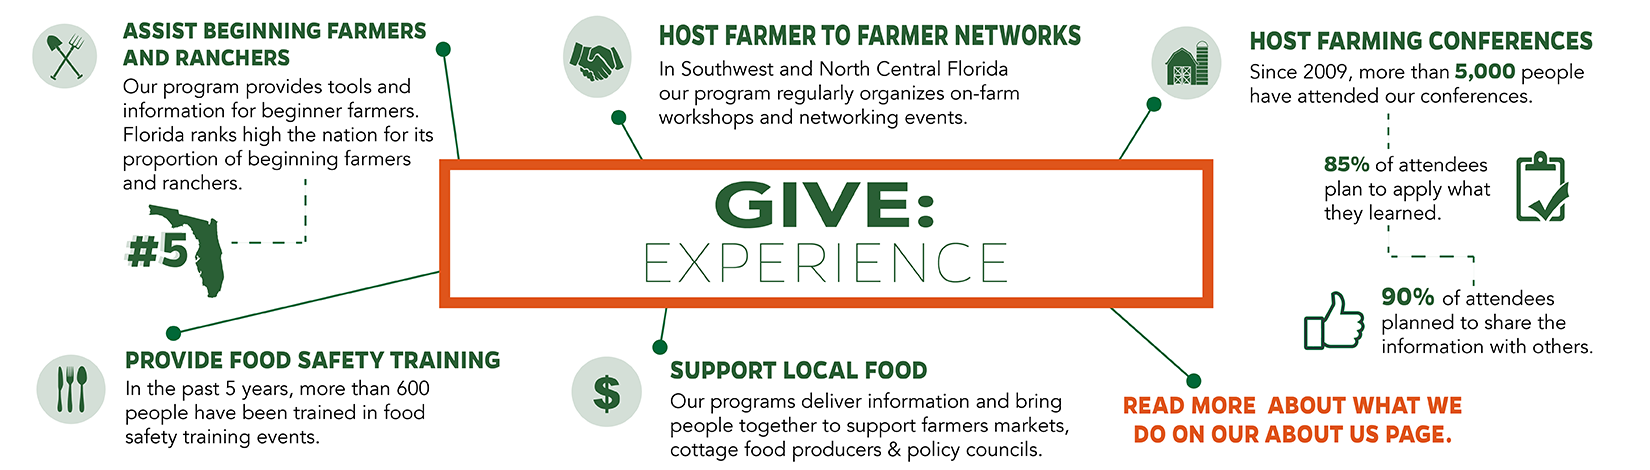 Give experience: 1- Assist beginning farmers and ranchers 2- Host farmer-to-farmer networks 3- Host farming conferences 4- Provide food safety training 5- Support local food 